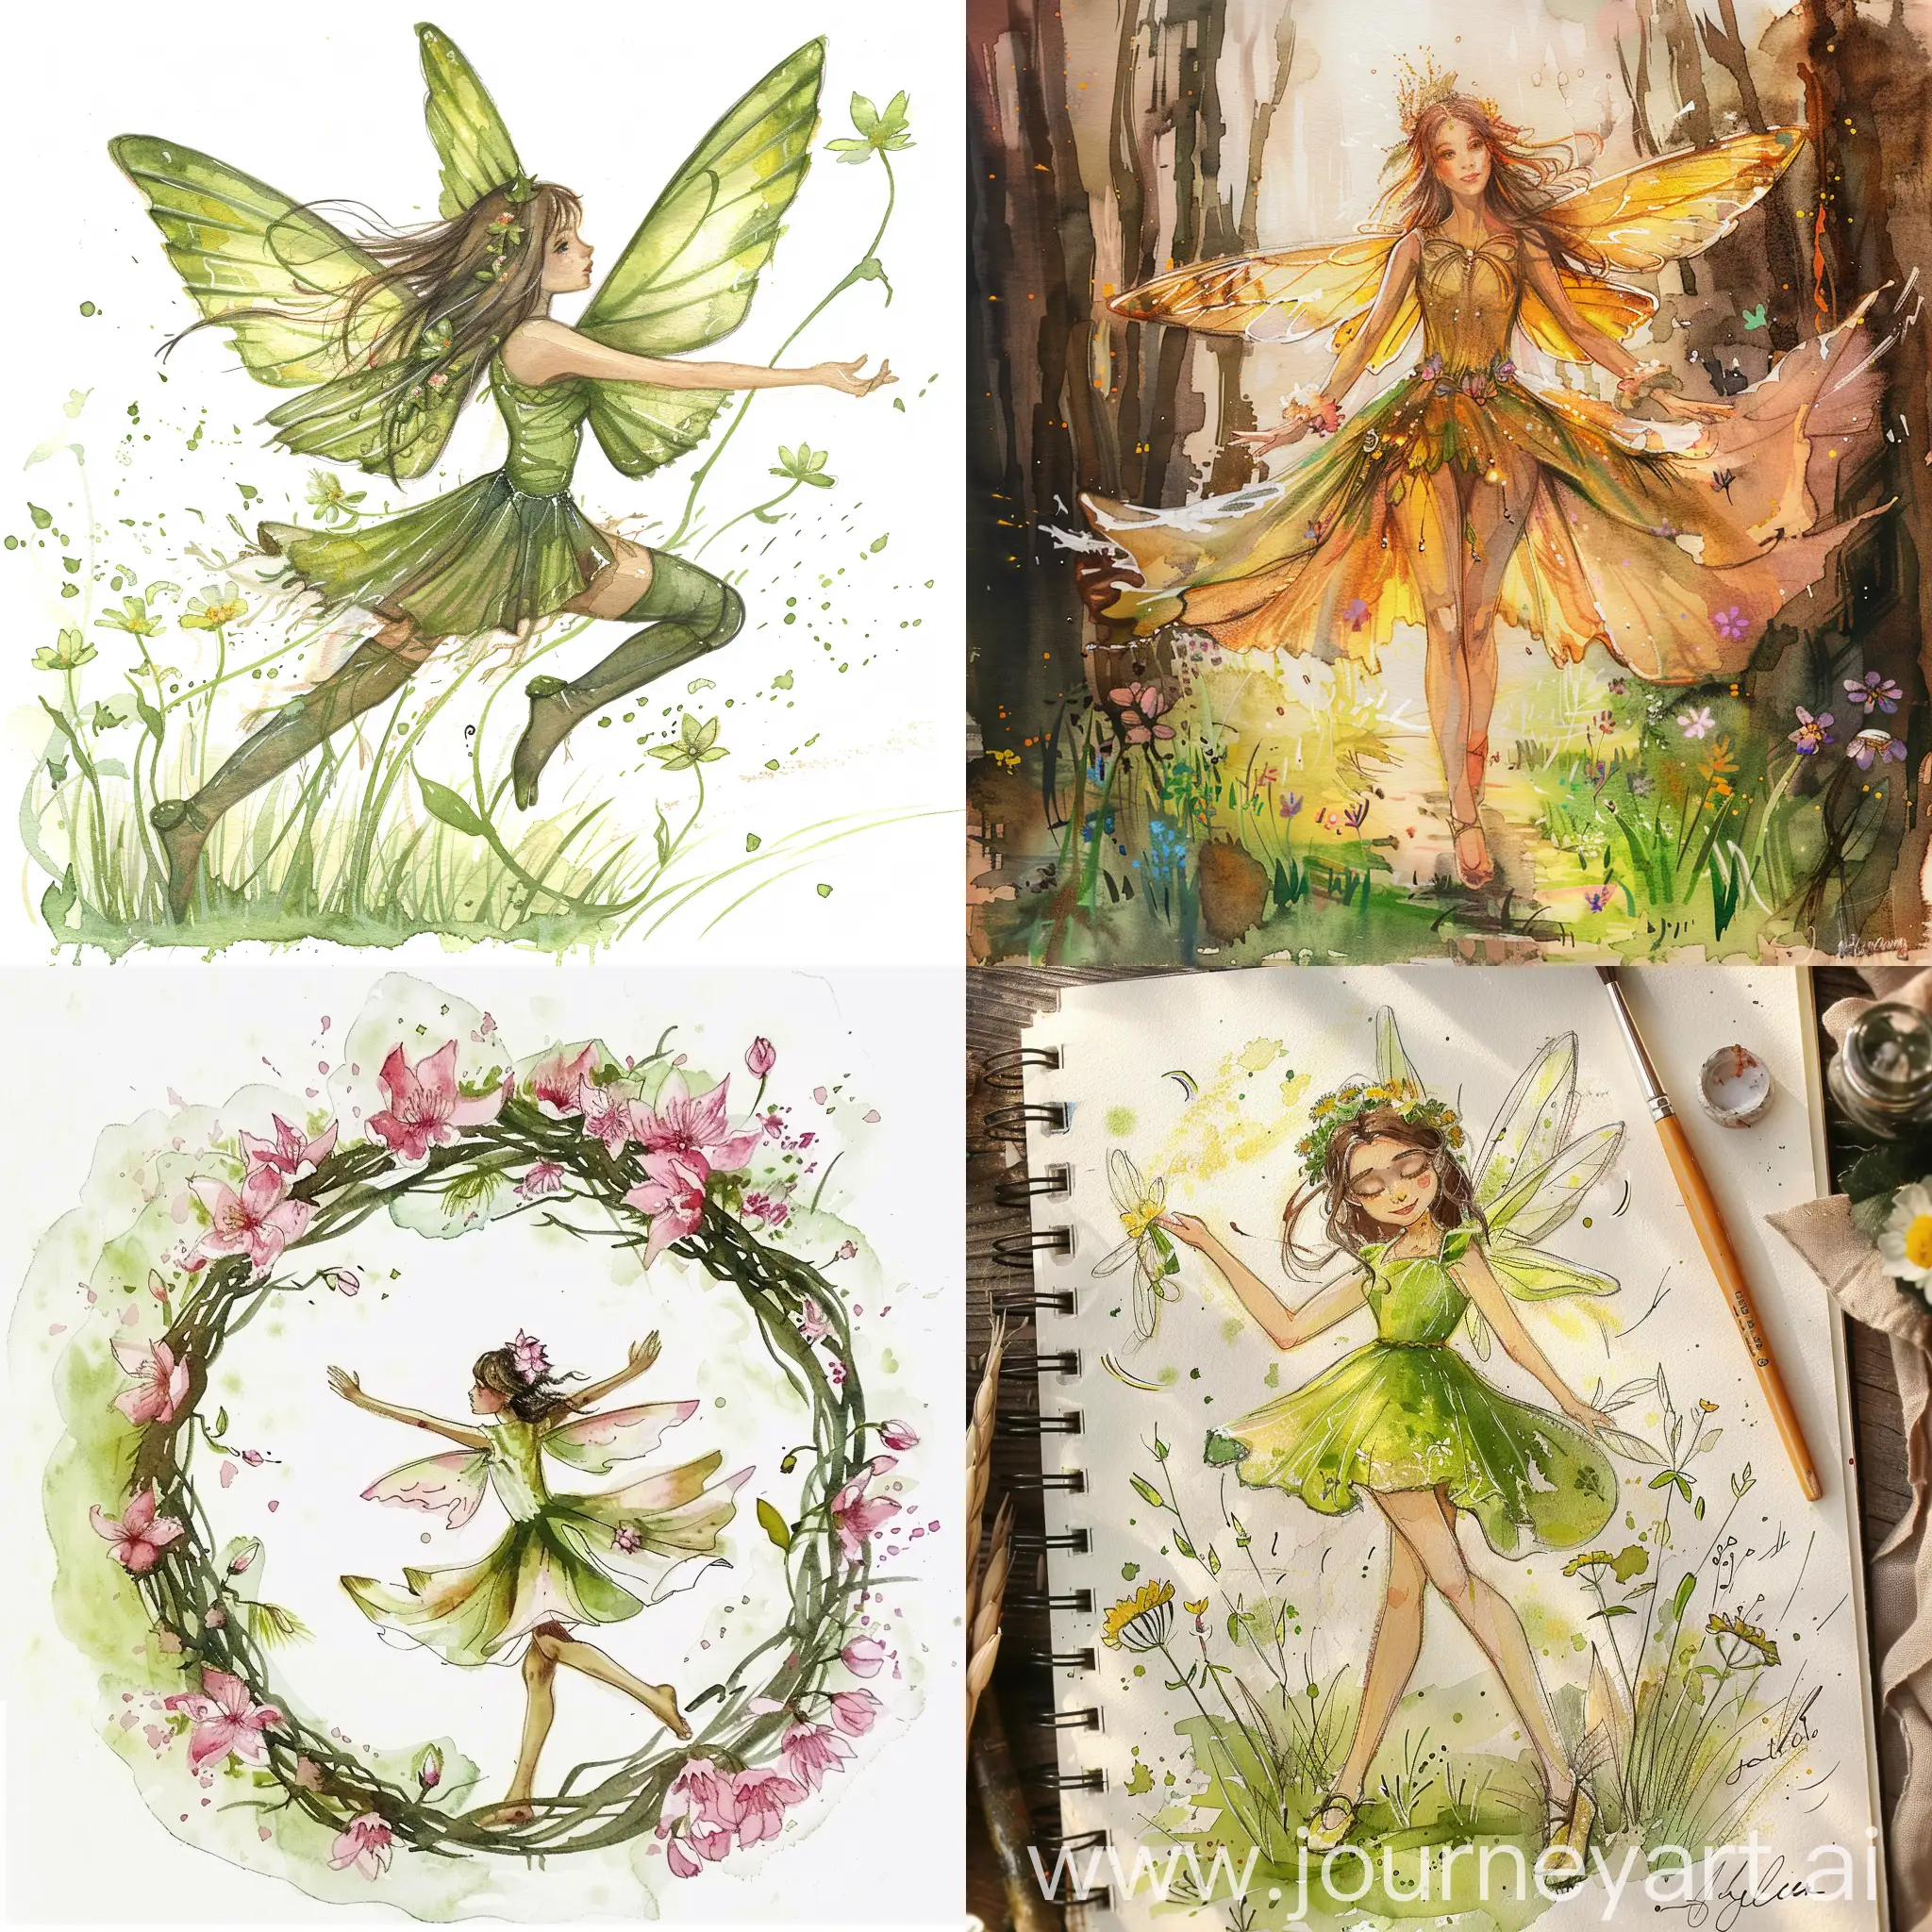 Enchanting-Watercolor-Fairy-Captivating-Spring-Nymph-in-Artistic-Sketch